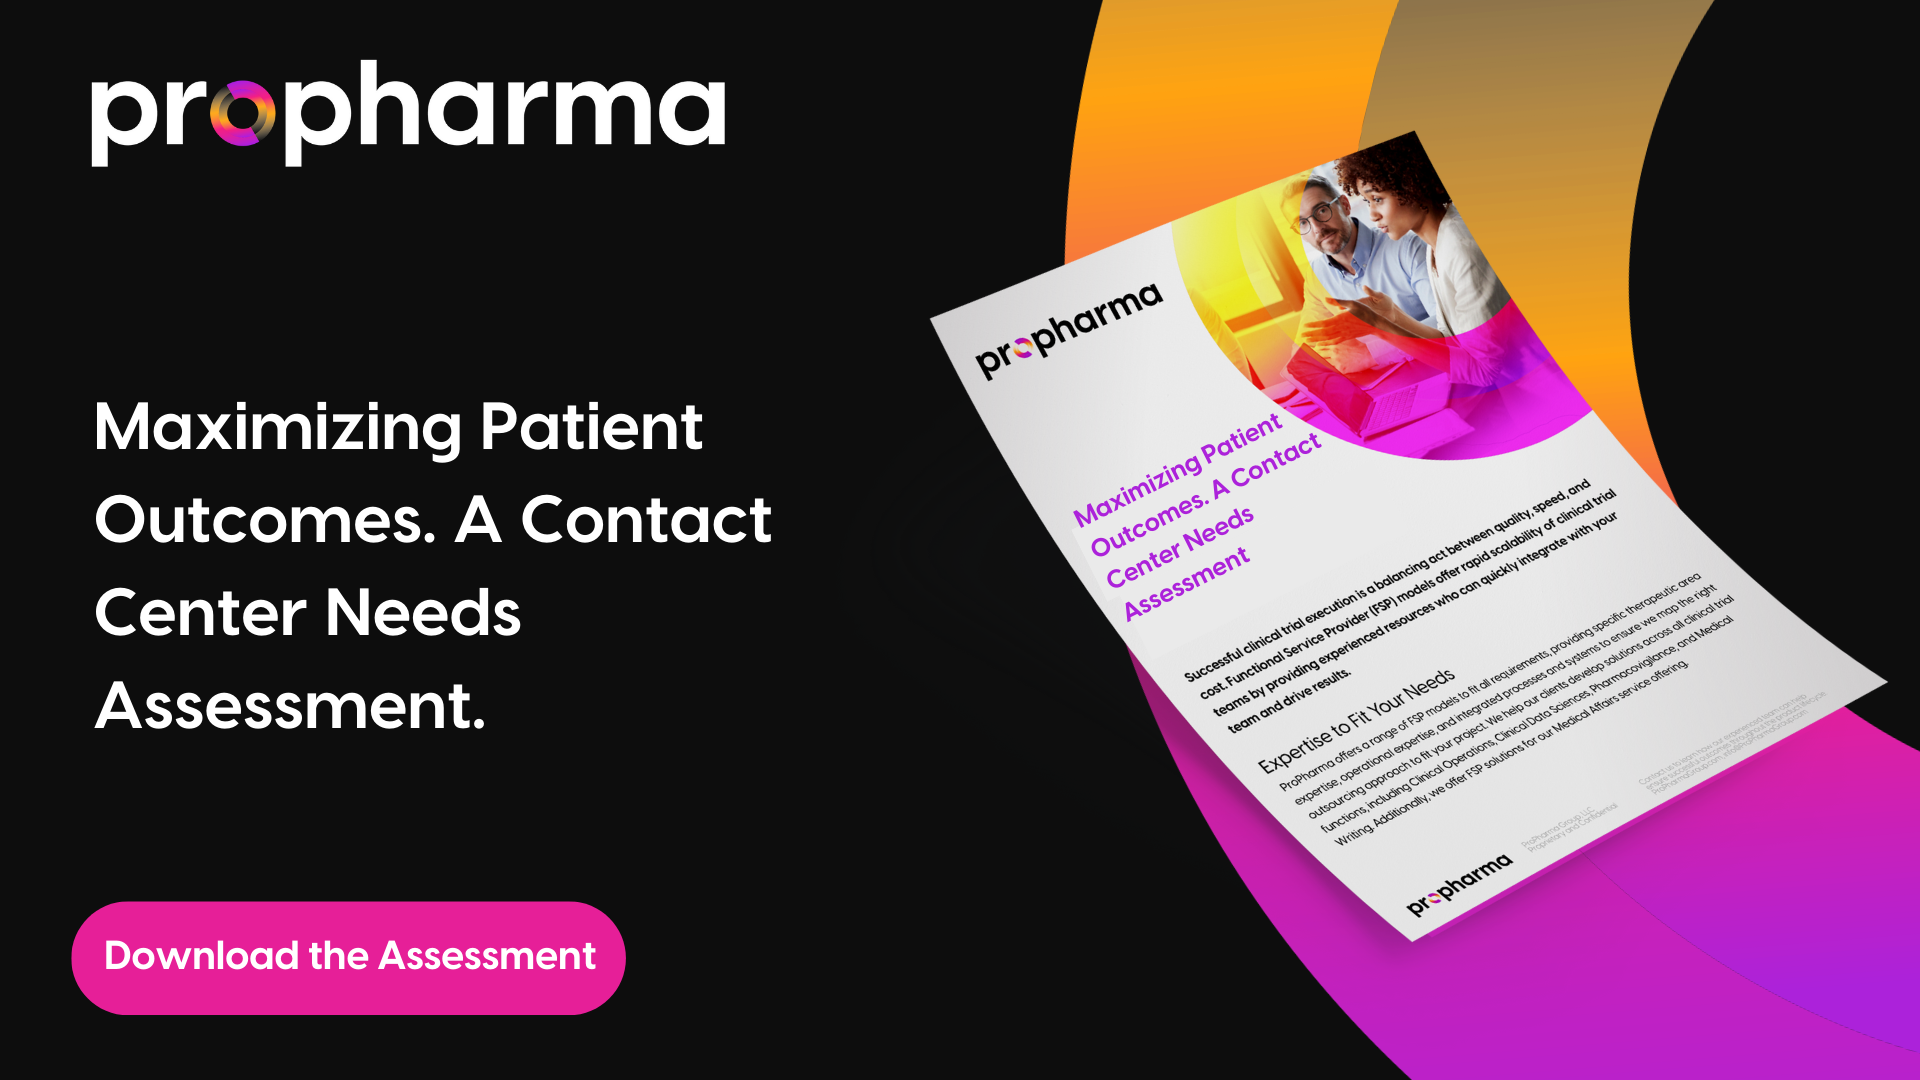 Guide: Maximizing Patient Outcomes. A Contact Center Needs Assessment